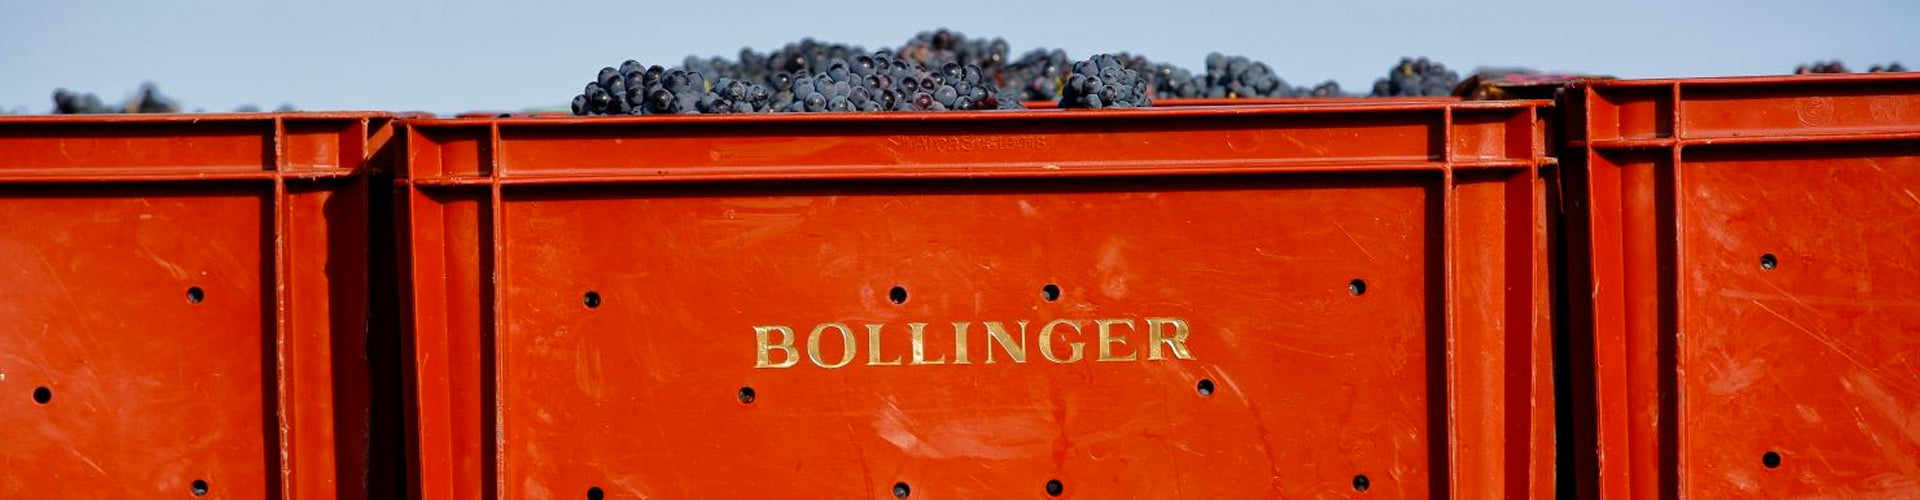 Champagne Bollinger Grapes in Picking Crates